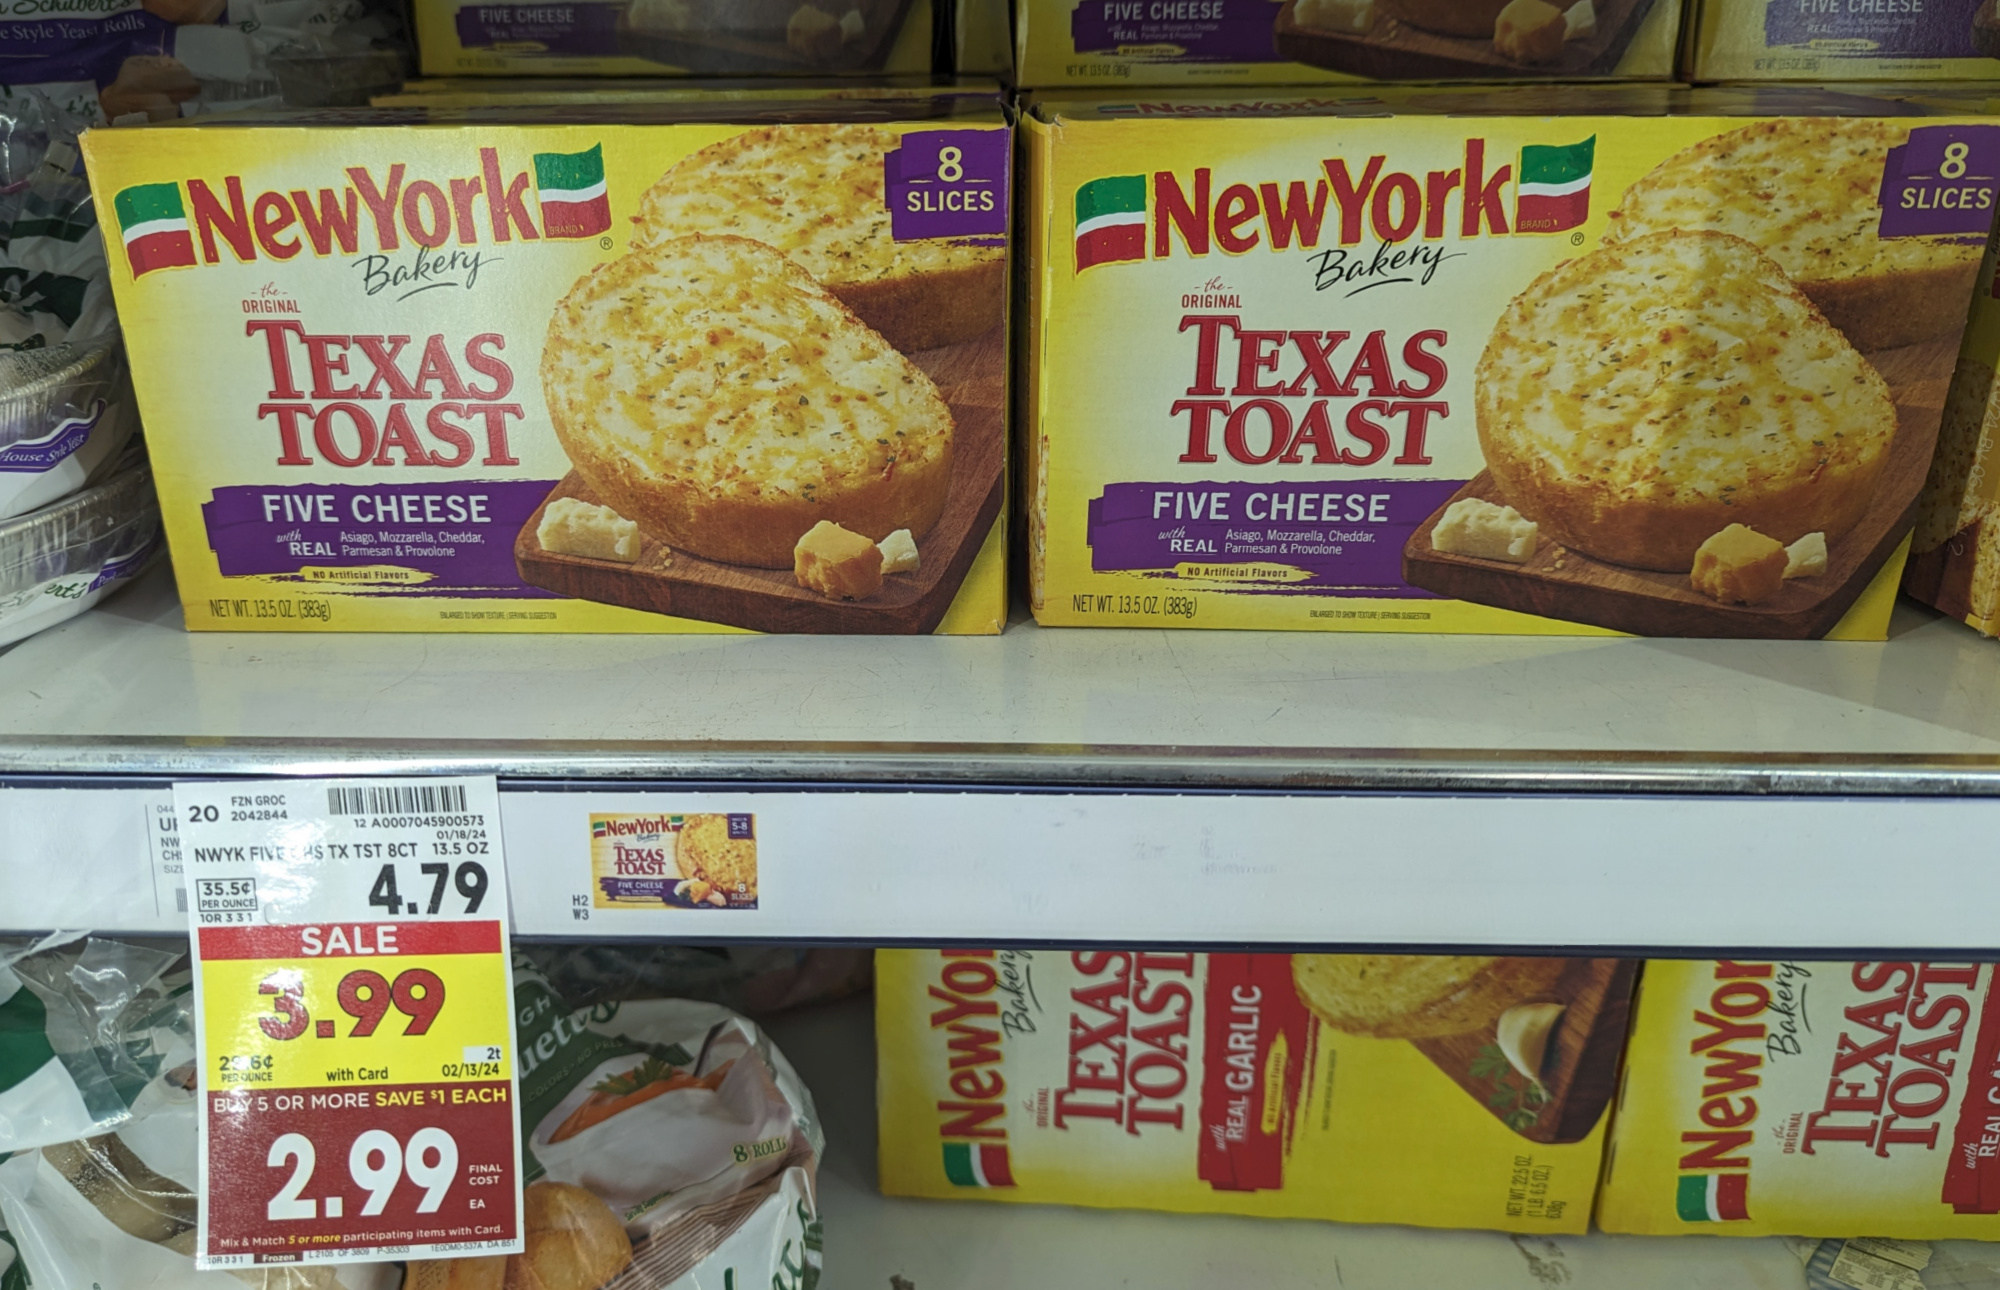 New York Bakery Frozen Bread As Low As $2.24 At Kroger – Less Than Half Price